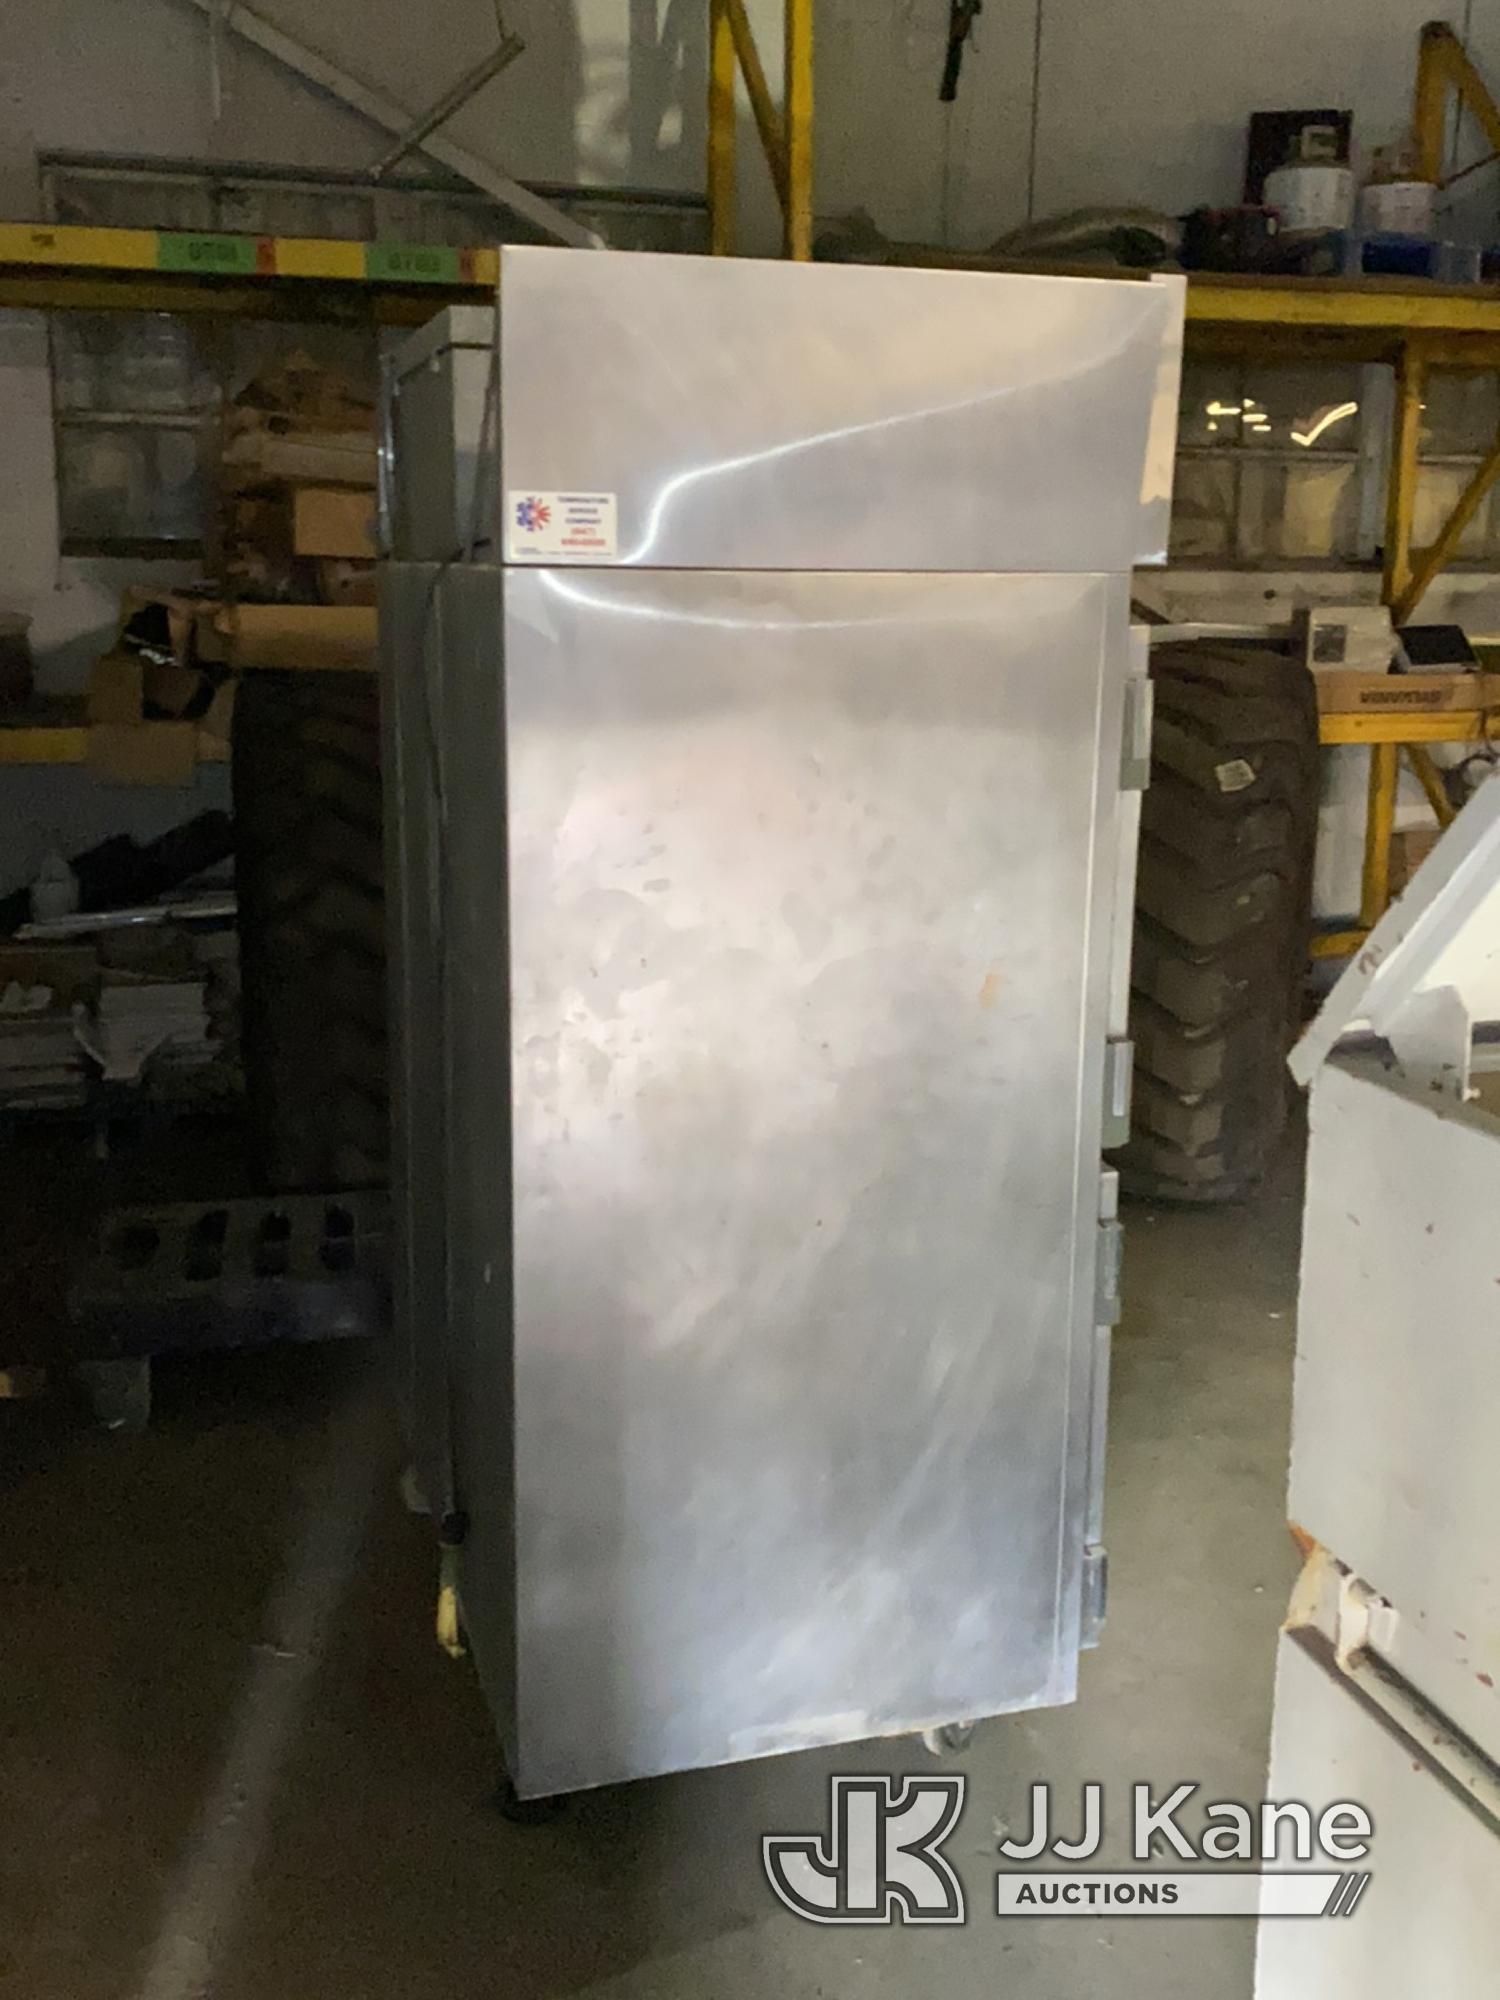 (Harvey, IL) Victory Commerical Refrigerator Model RS-2D-S7-HD. (Condition Unknown. Door Hinge Borke